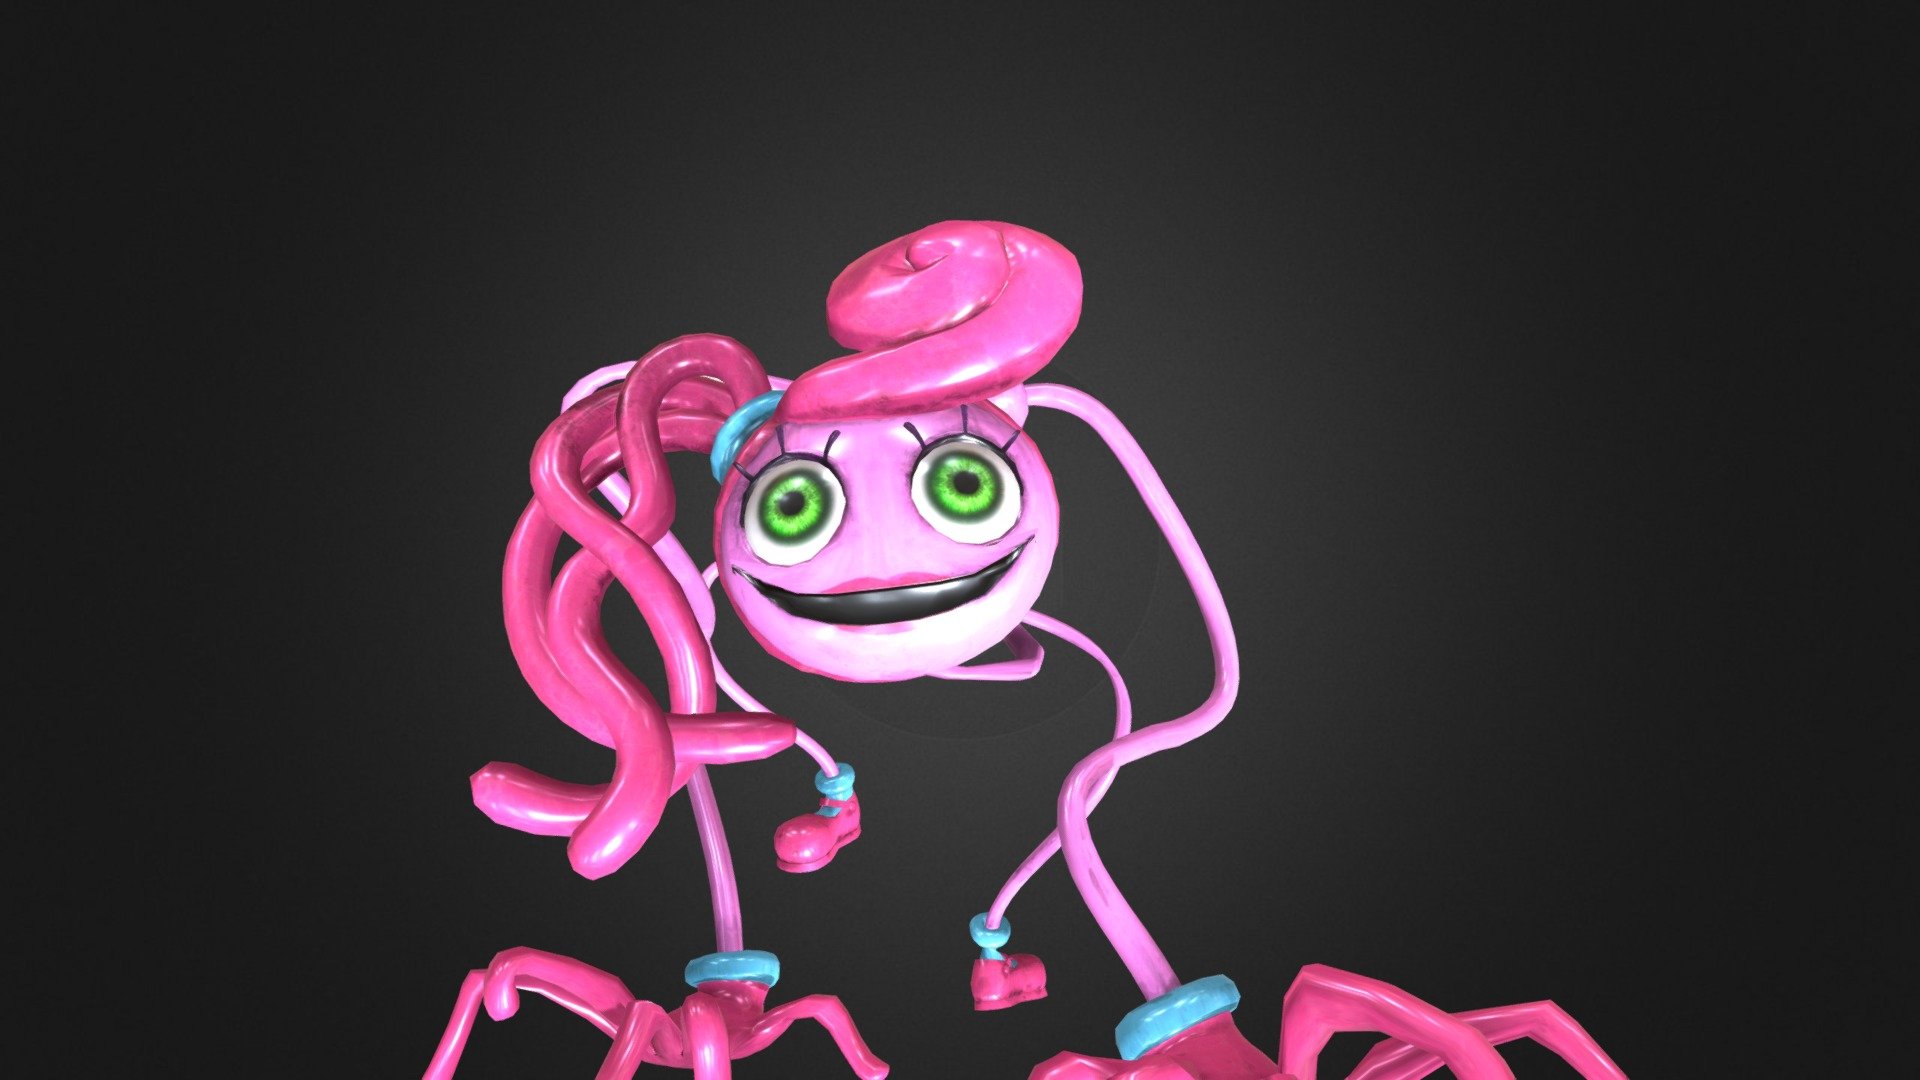 mommy-long-legs-poppy-playtime-chapter-2 - 3D model by 26kfpuaque  (@26kfpuaque) [46e8c8c]